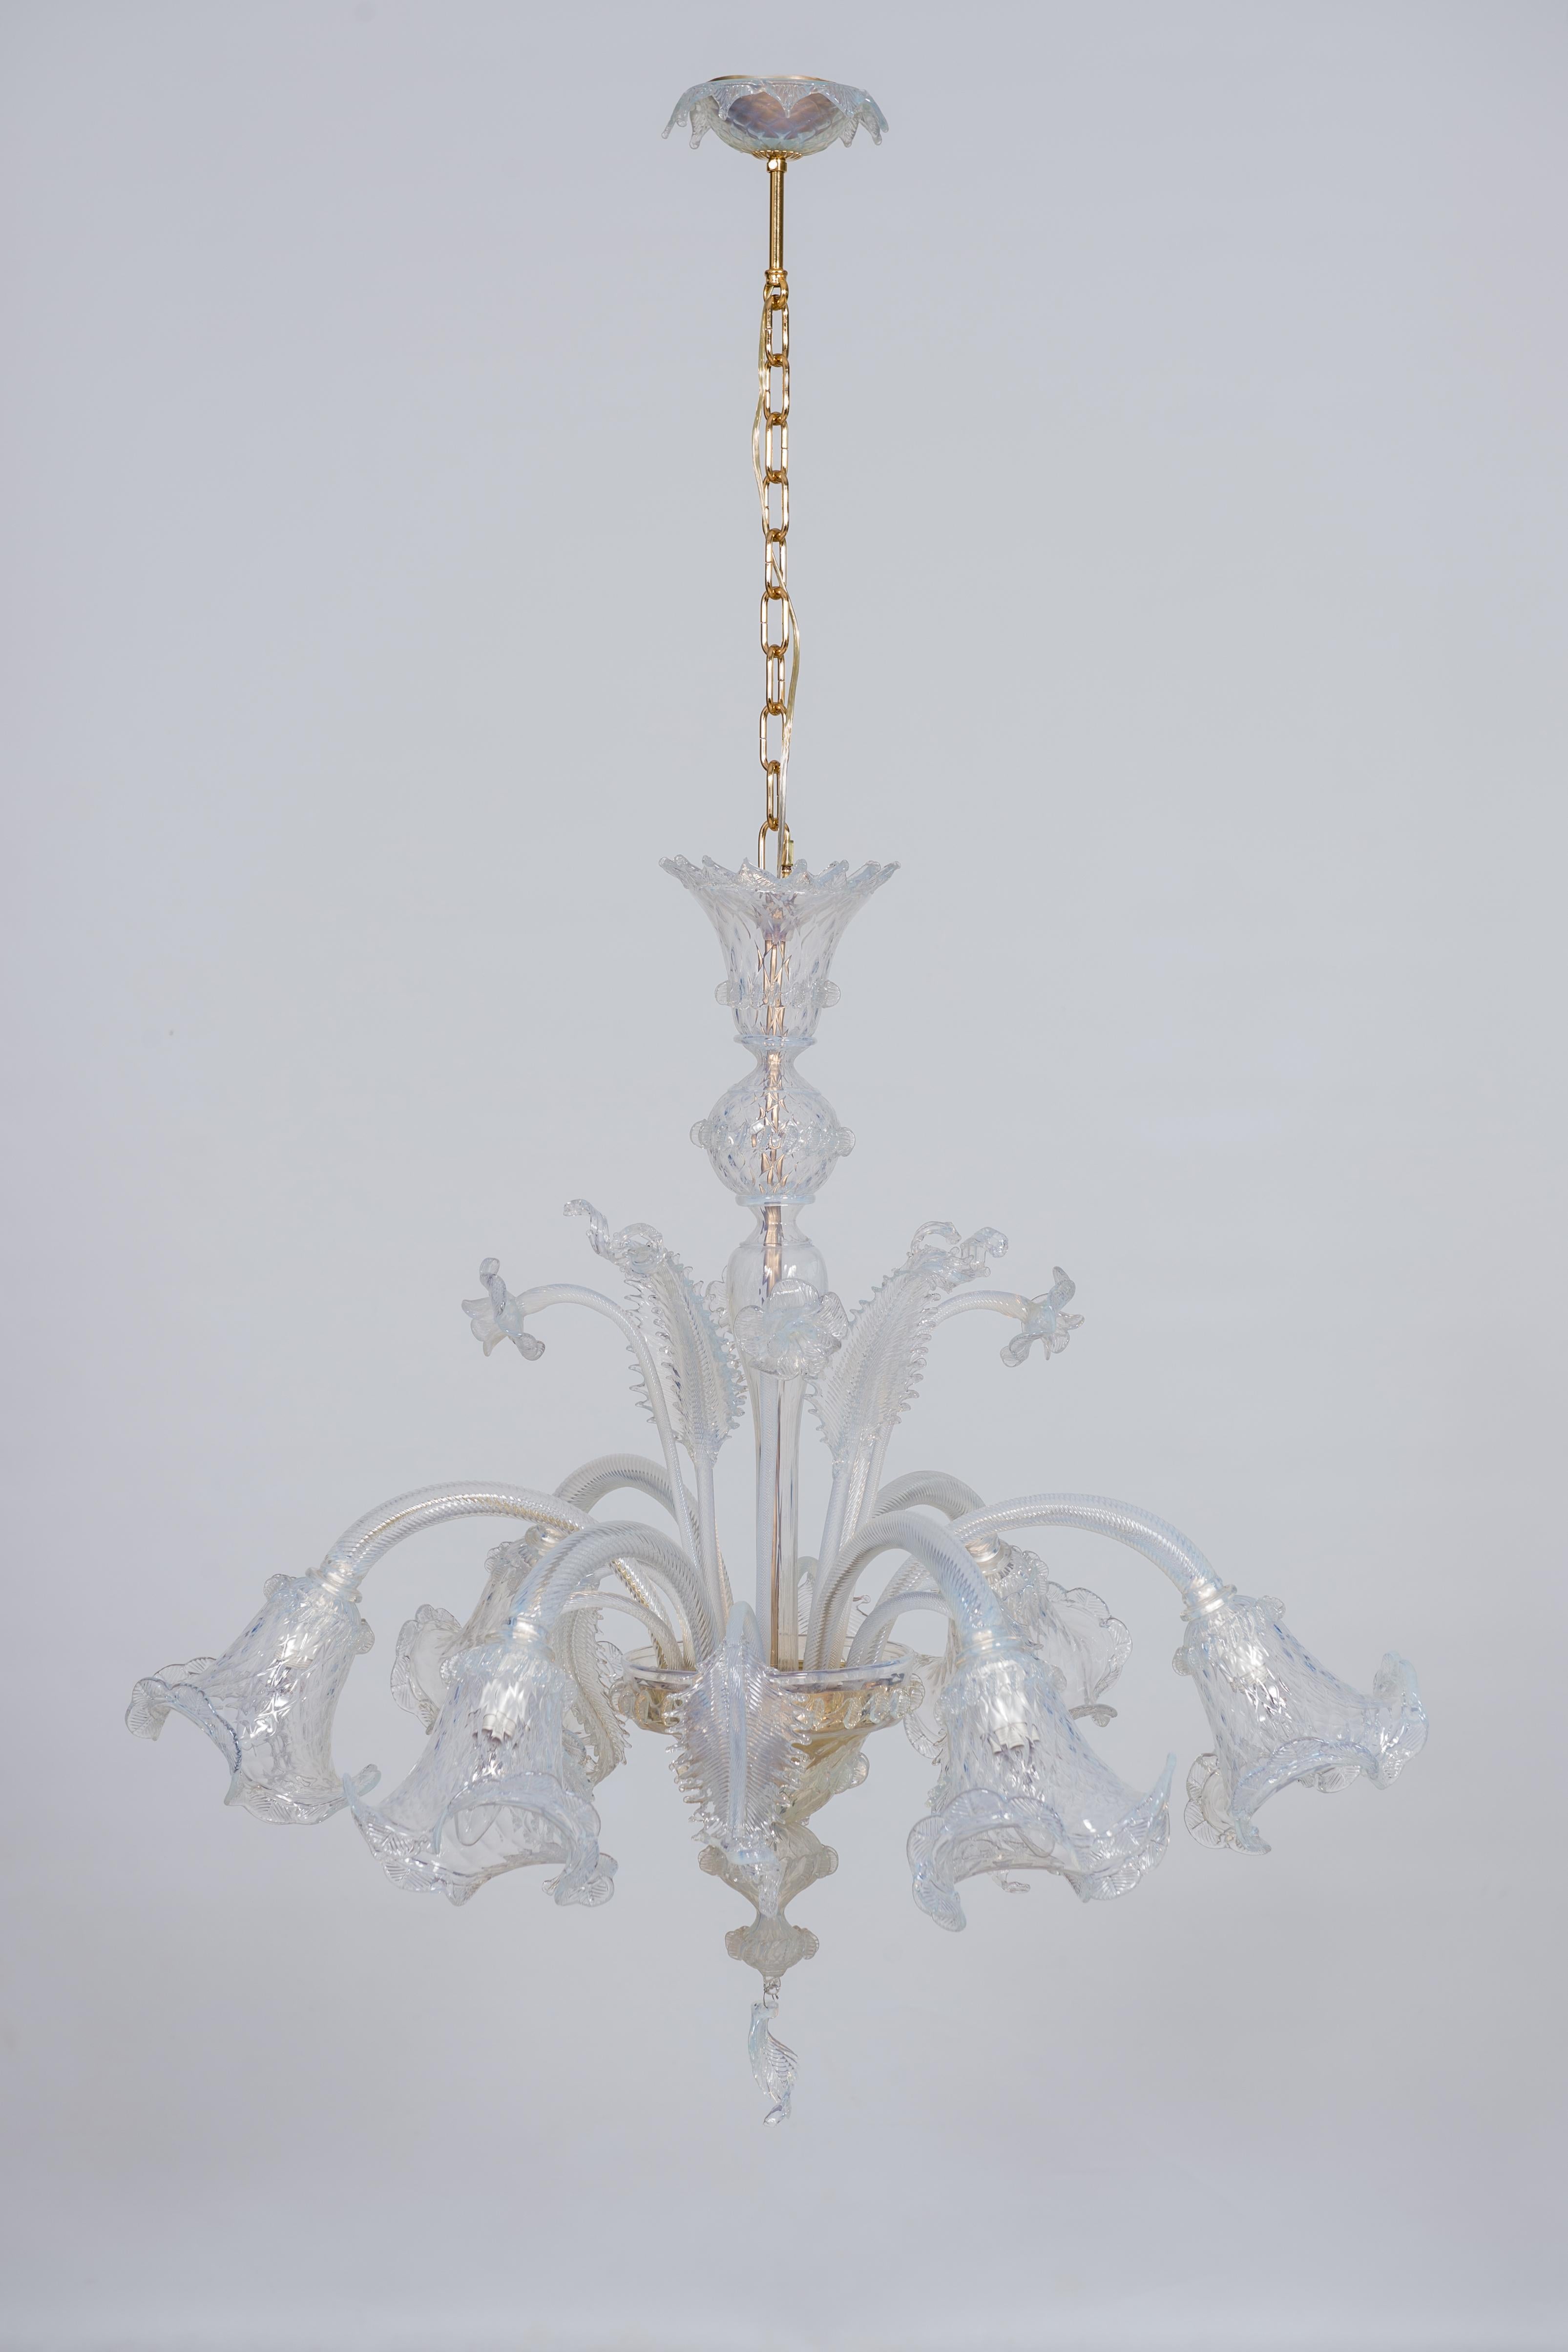 This exquisite opaline chandelier, handcrafted in Murano Island in the 1960s (Venice area, Italy), is distinguished by its colorful floral decorations that veer toward a light blue color. Six opaline arms with bulbs protrude from the chandelier by